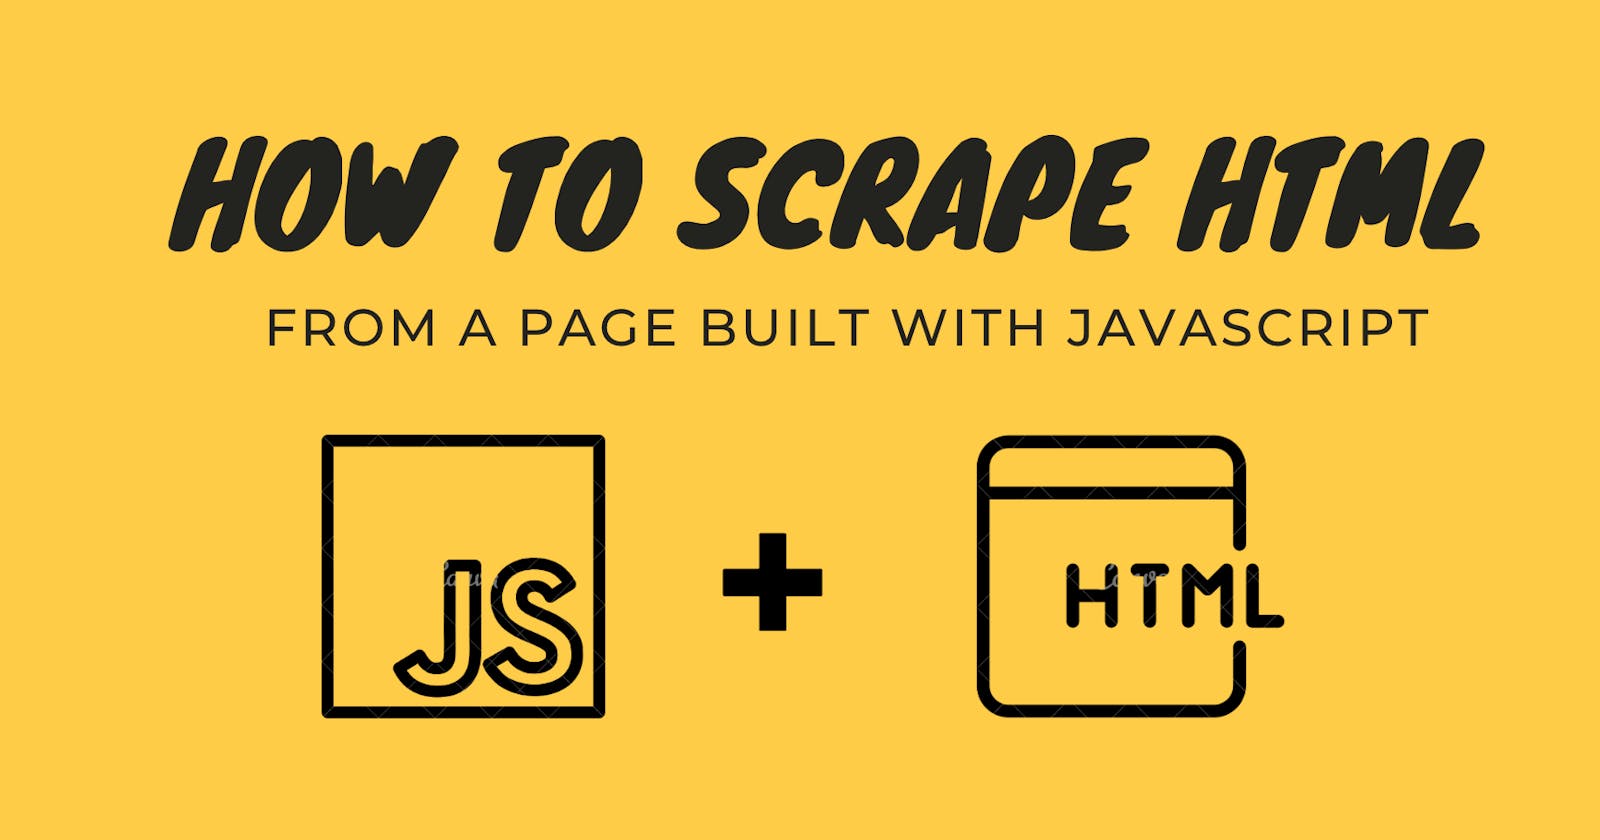 How to scrape HTML from a website built with Javascript?